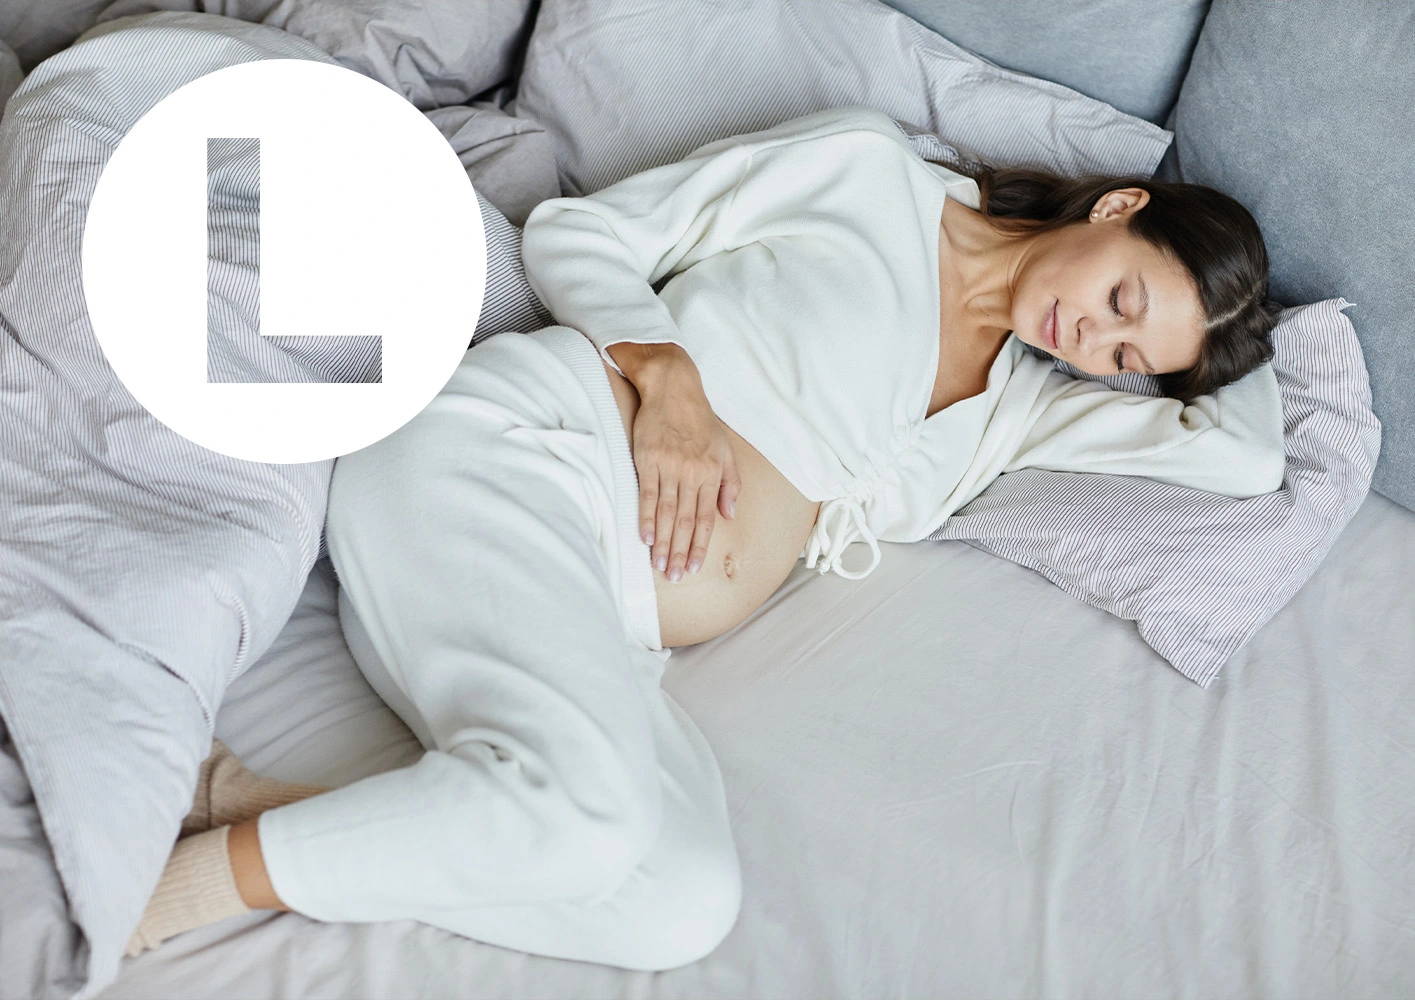 Letter L / pregnant woman in bed.